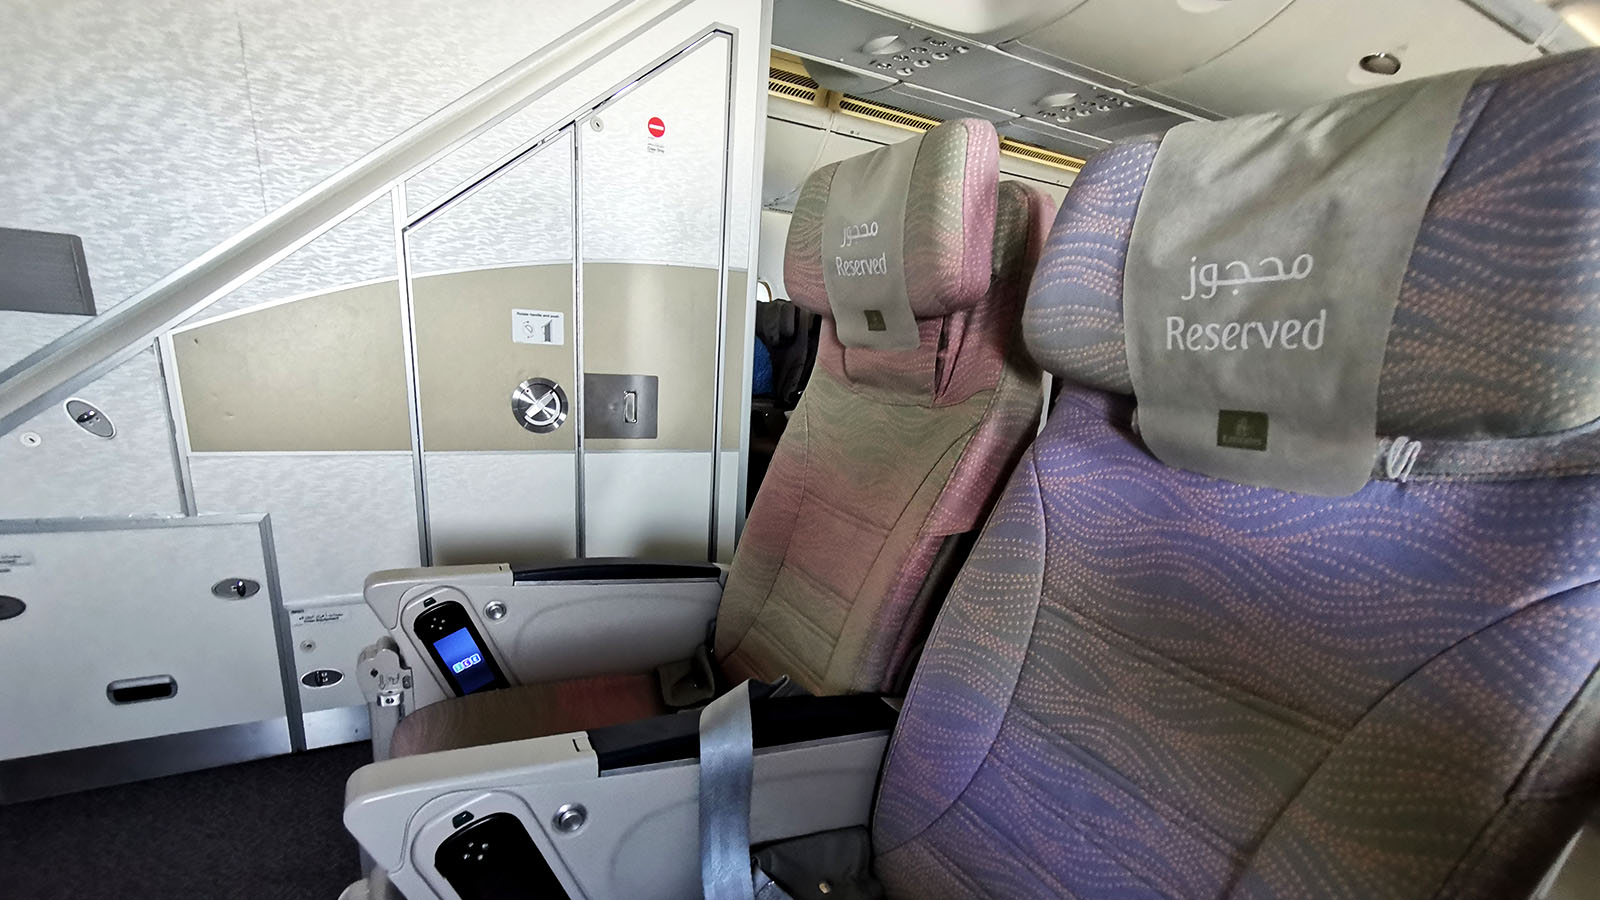 Pay for extra space in Emirates Airbus A380 Economy